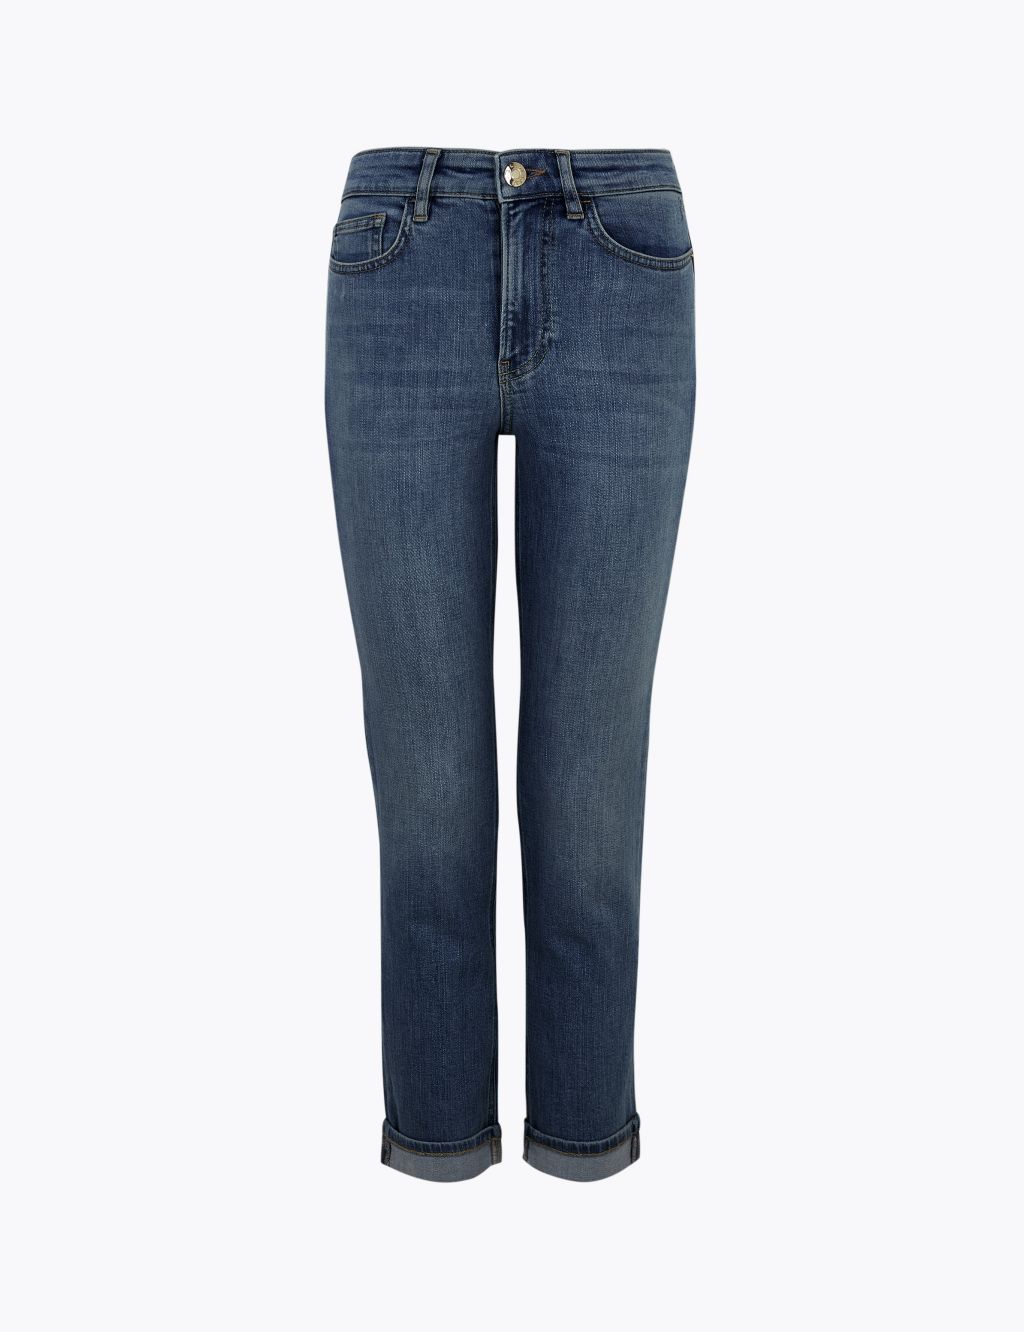 Slim Fit Turn Up Jeans With Stretch | M&S Collection | M&S